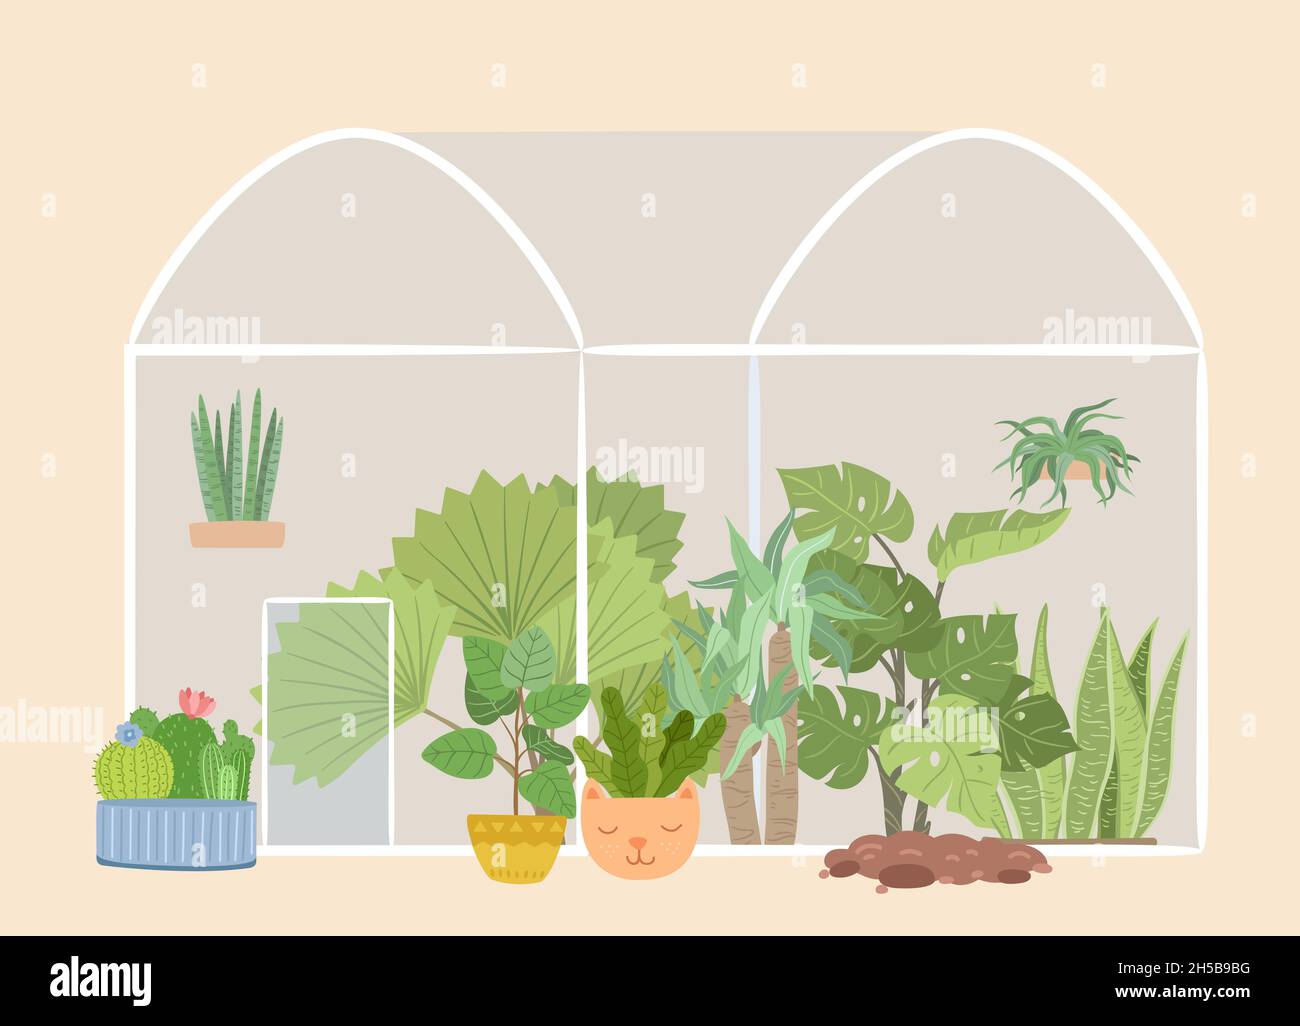 Glass greenhouse garden. Plants gardening, green tree and bushes. Succulents flower bed, botanical plantation, urban rustic jungle vector concept Stock Vector